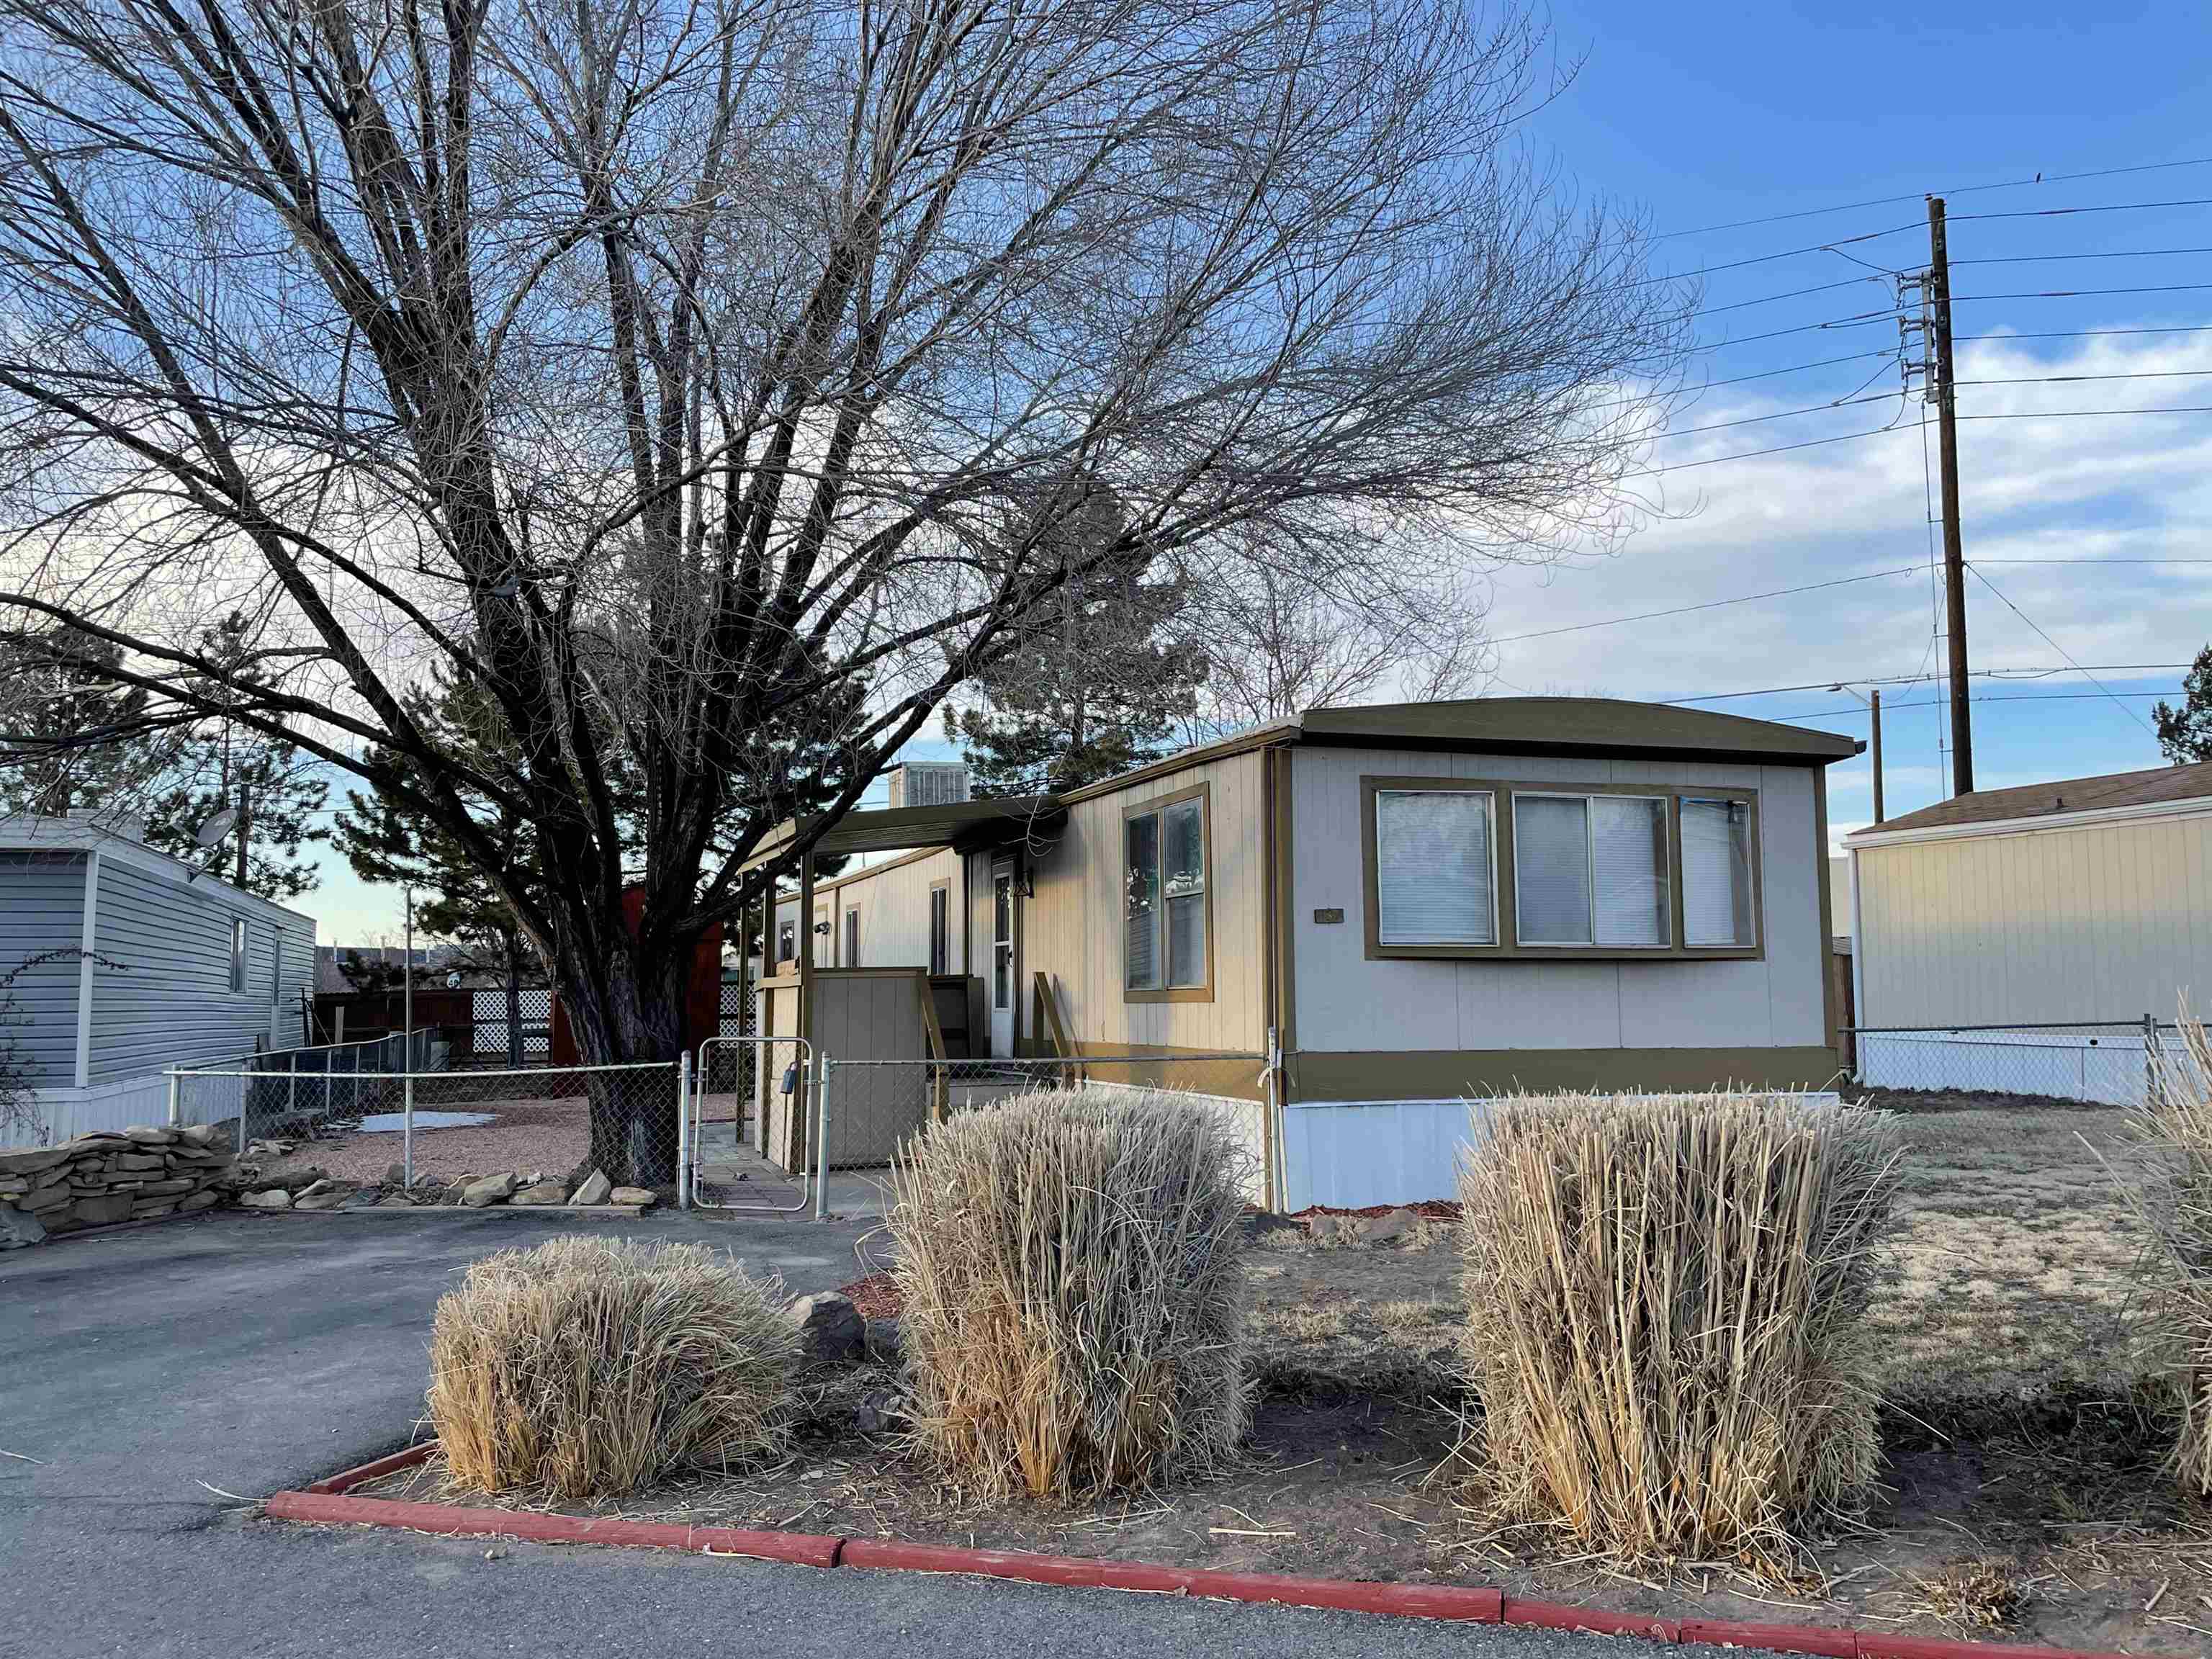 585 25 1/2 Road, Grand Junction, CO